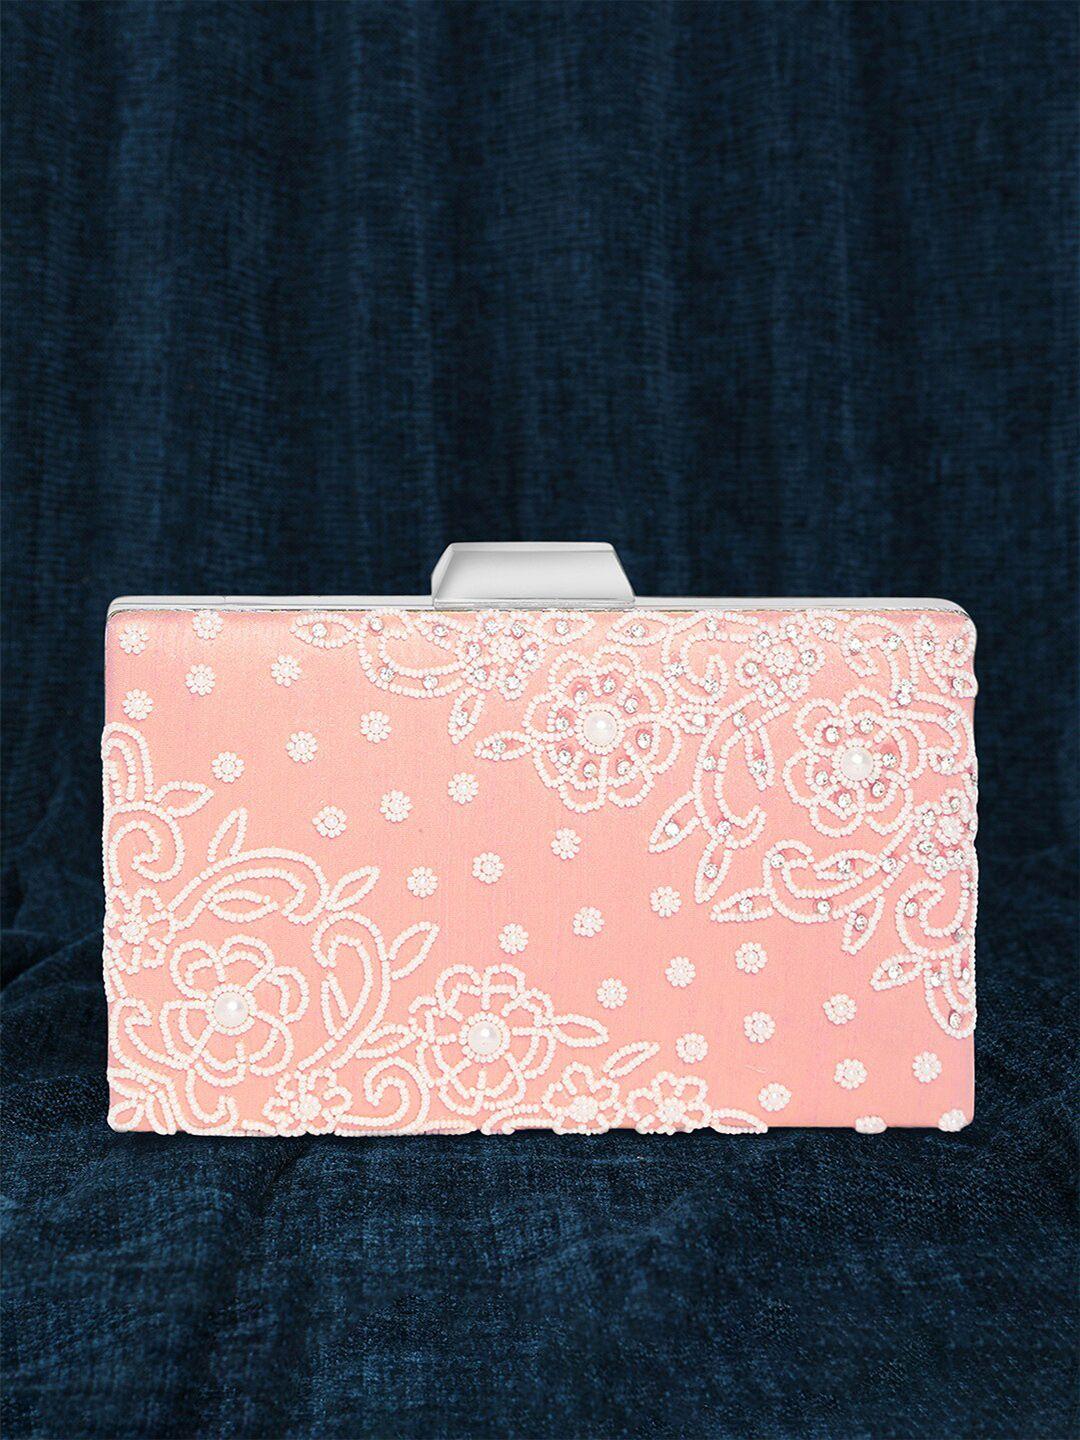 peora embroidered purse clutch